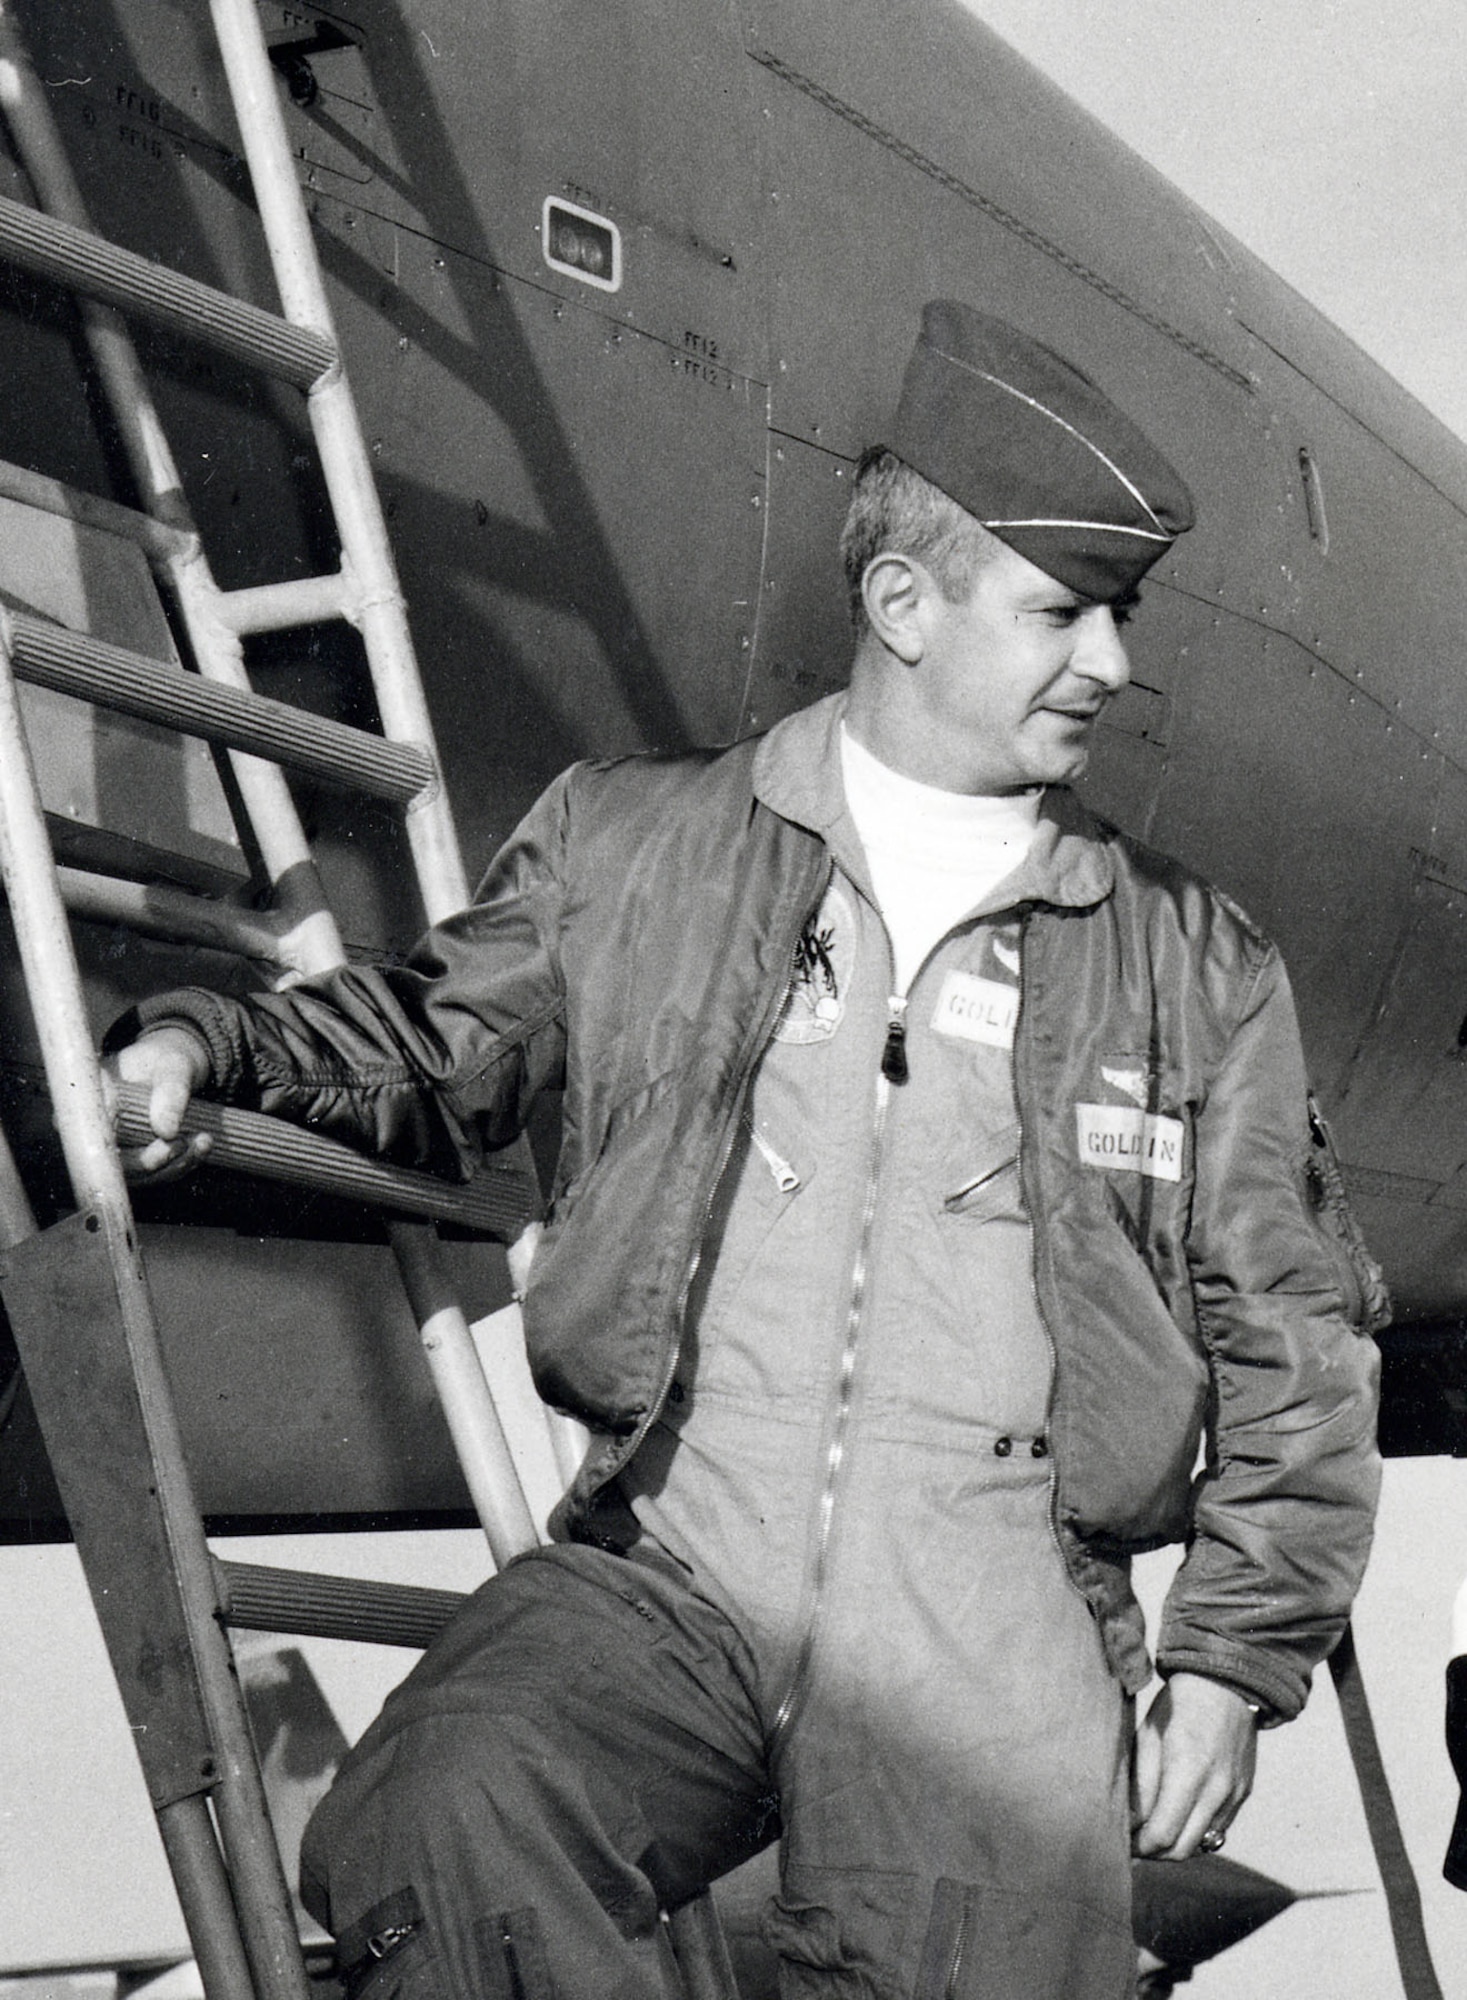 In January 1968, before completing his F-105 Wild Weasel training, Maj. Stan Goldstein was hurriedly deployed to Osan AB, South Korea, in response to the Pueblo incident (North Korea captured a U.S. ship and its crew). The incident was resolved peacefully, so he had a patch made. He later completed a 100-mission tour in Southeast Asia in the 44th TFS, 388th TFW. (U.S. Air Force photo)